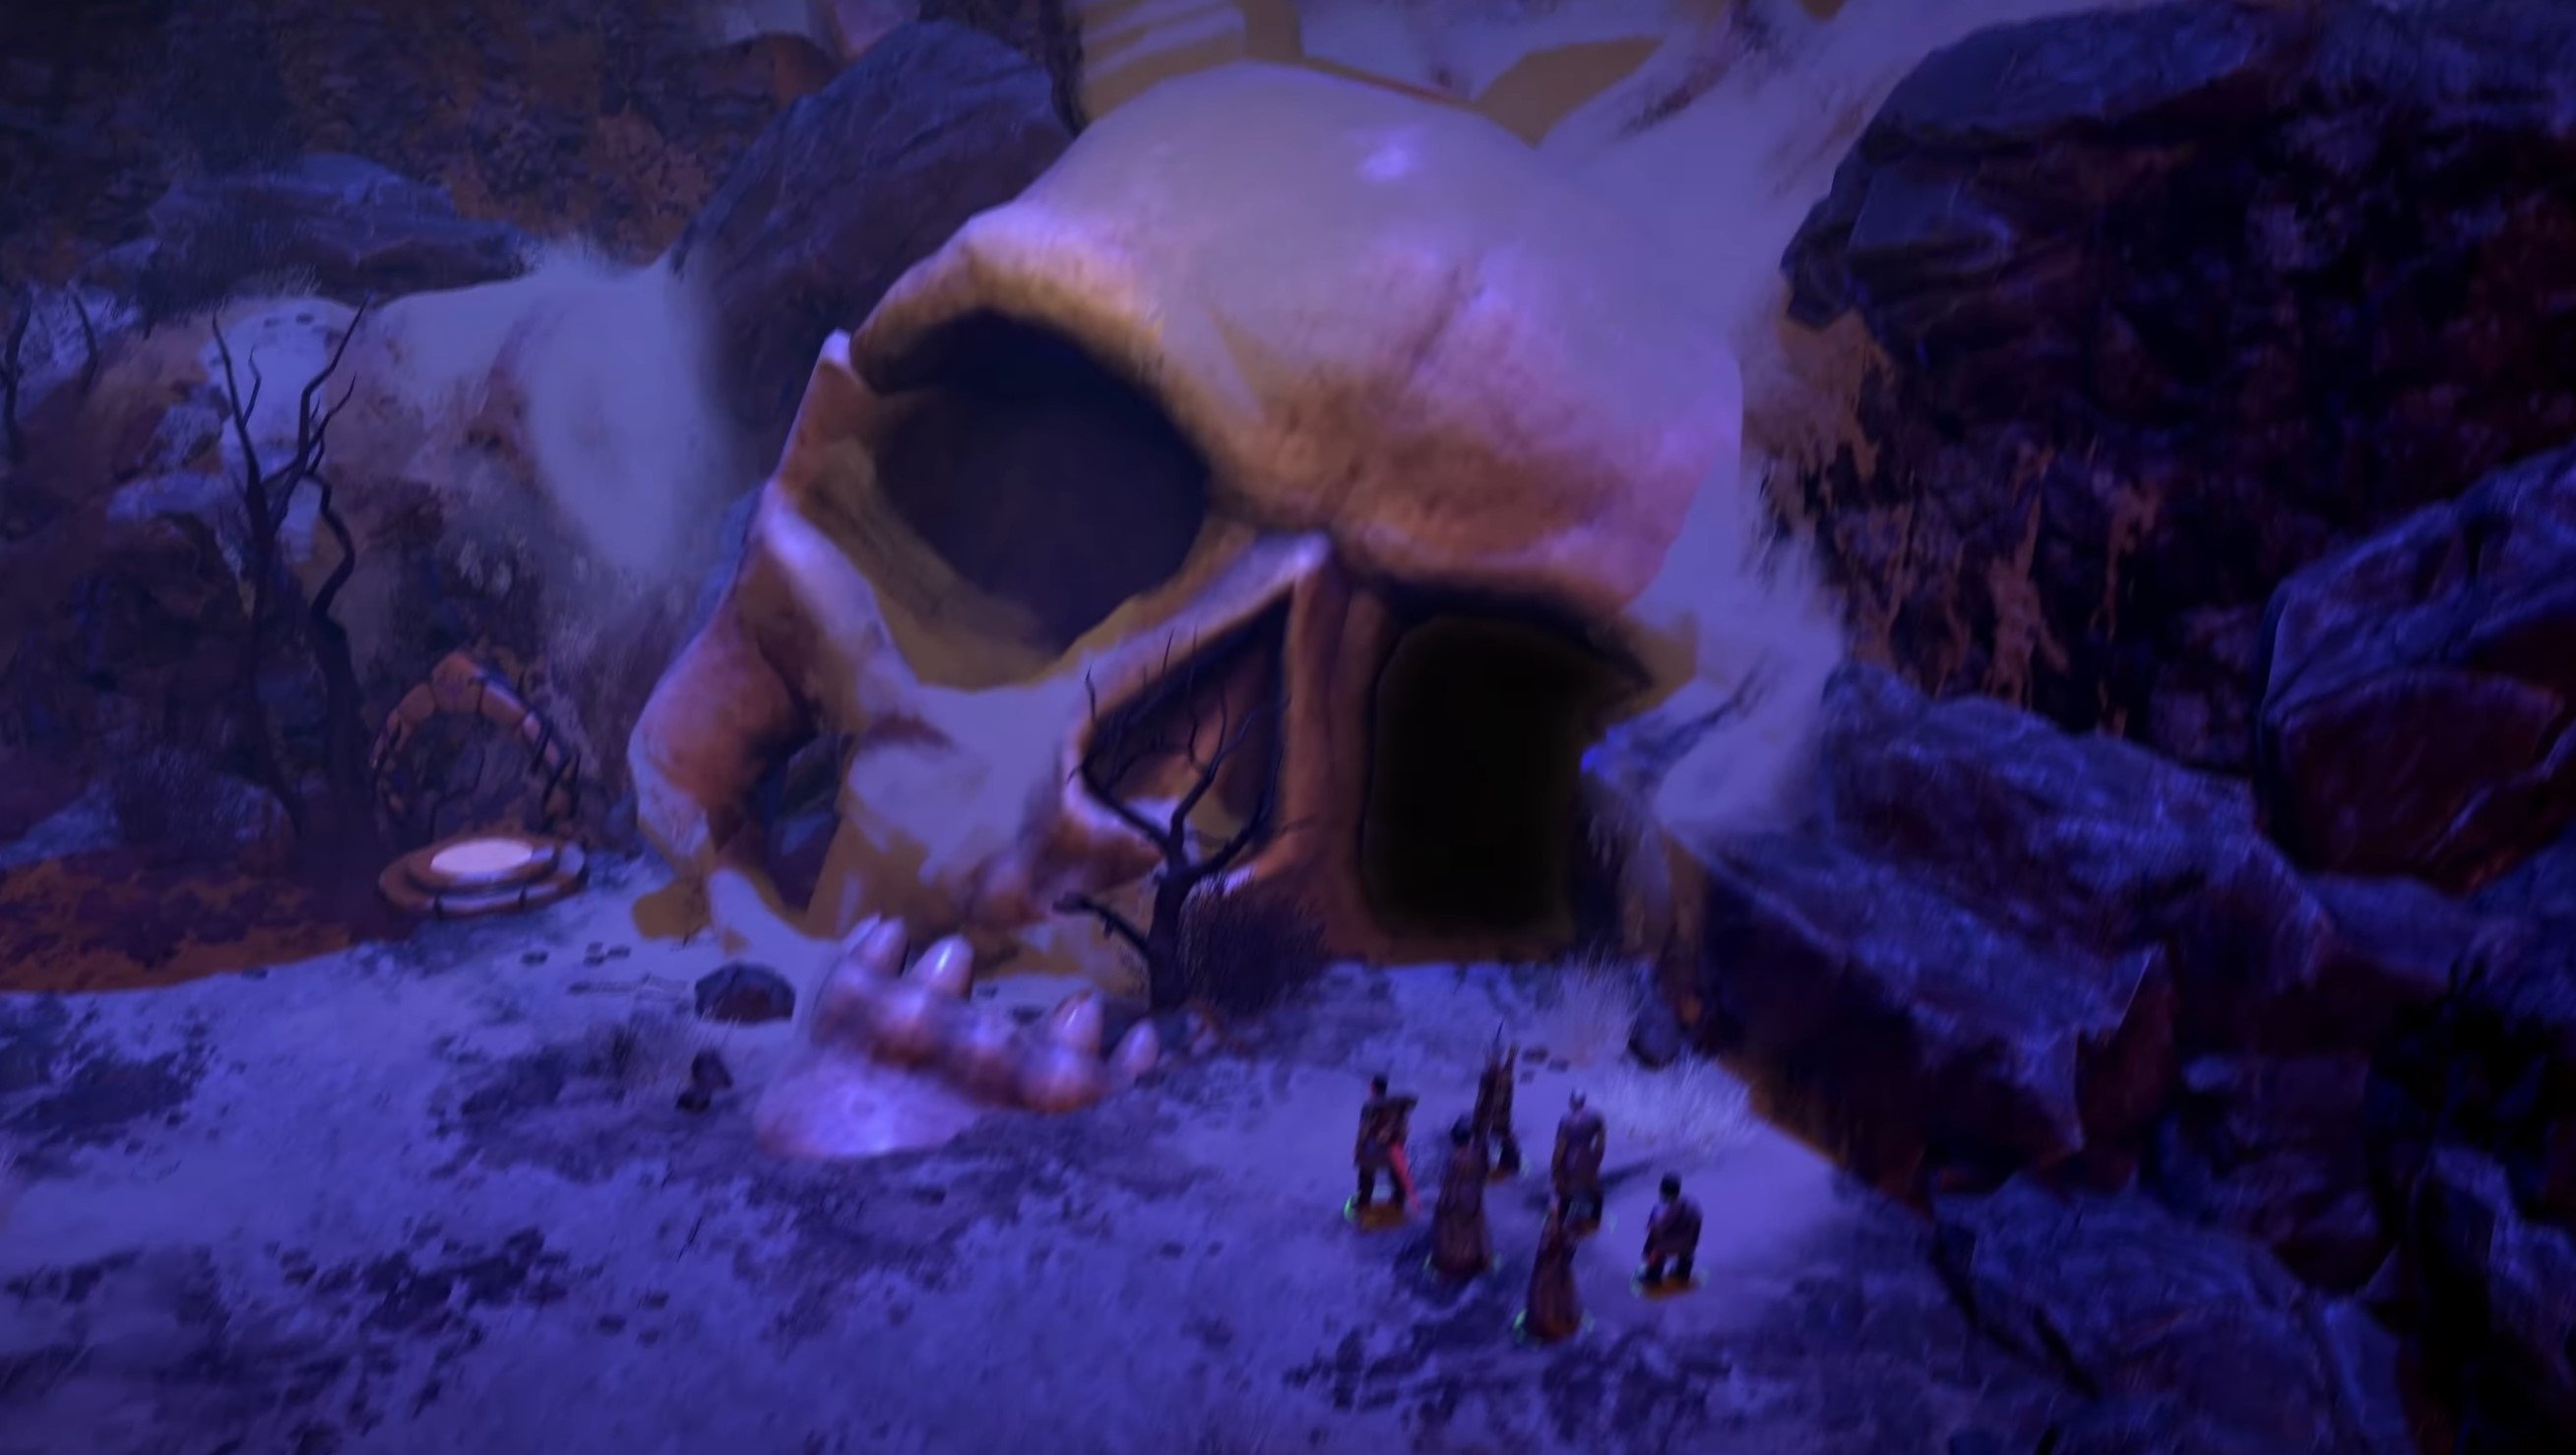  Pathfinder: Wrath of the Righteous beta test kicks off with a new trailer and screens 